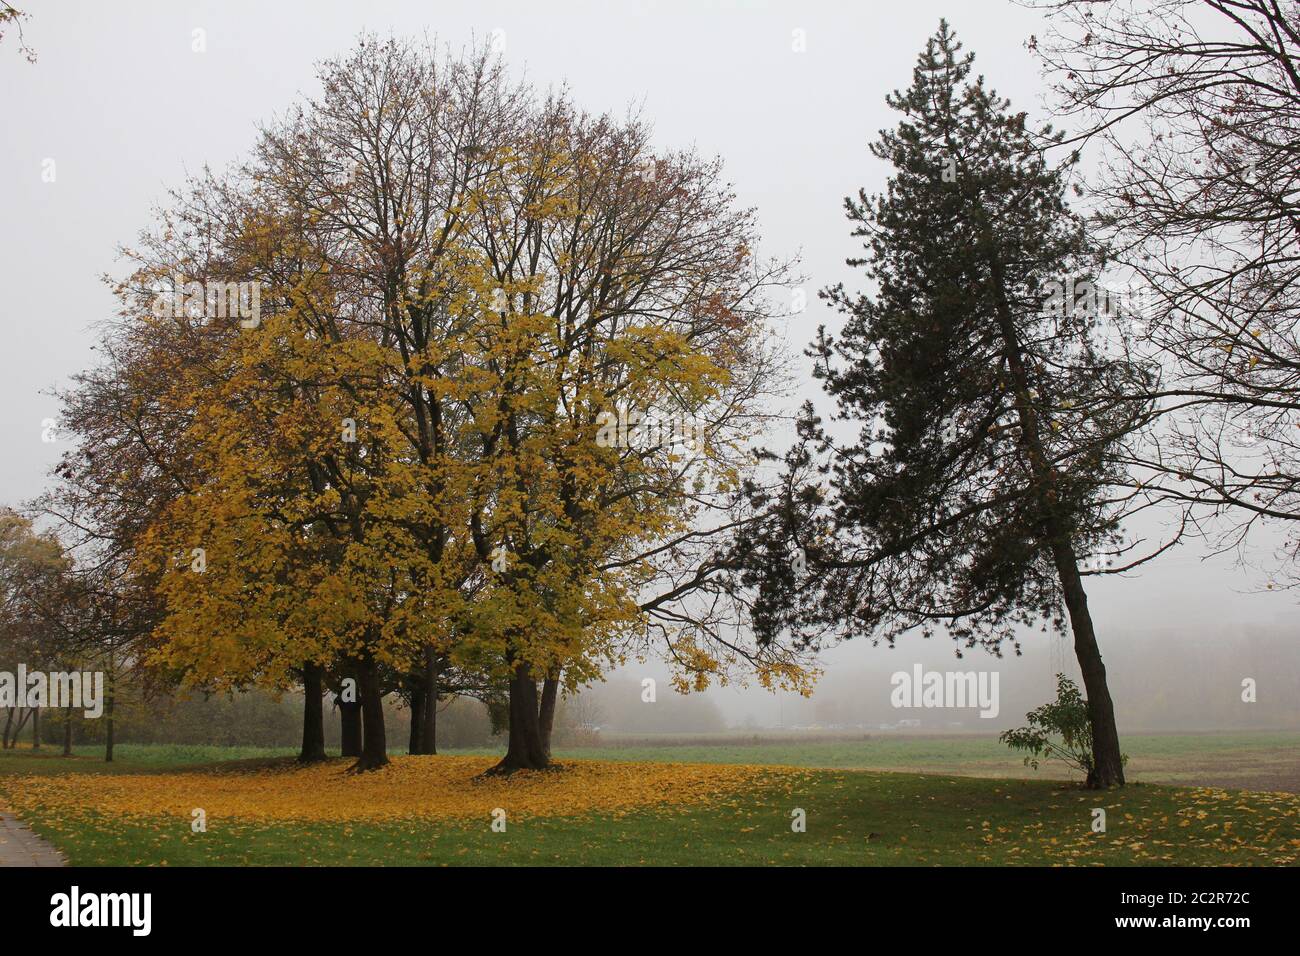 Autumn, group of broadlef trees with yellow leaves and a spruce tree in a foggy nature, green grass and yellow leaves on the ground Stock Photo